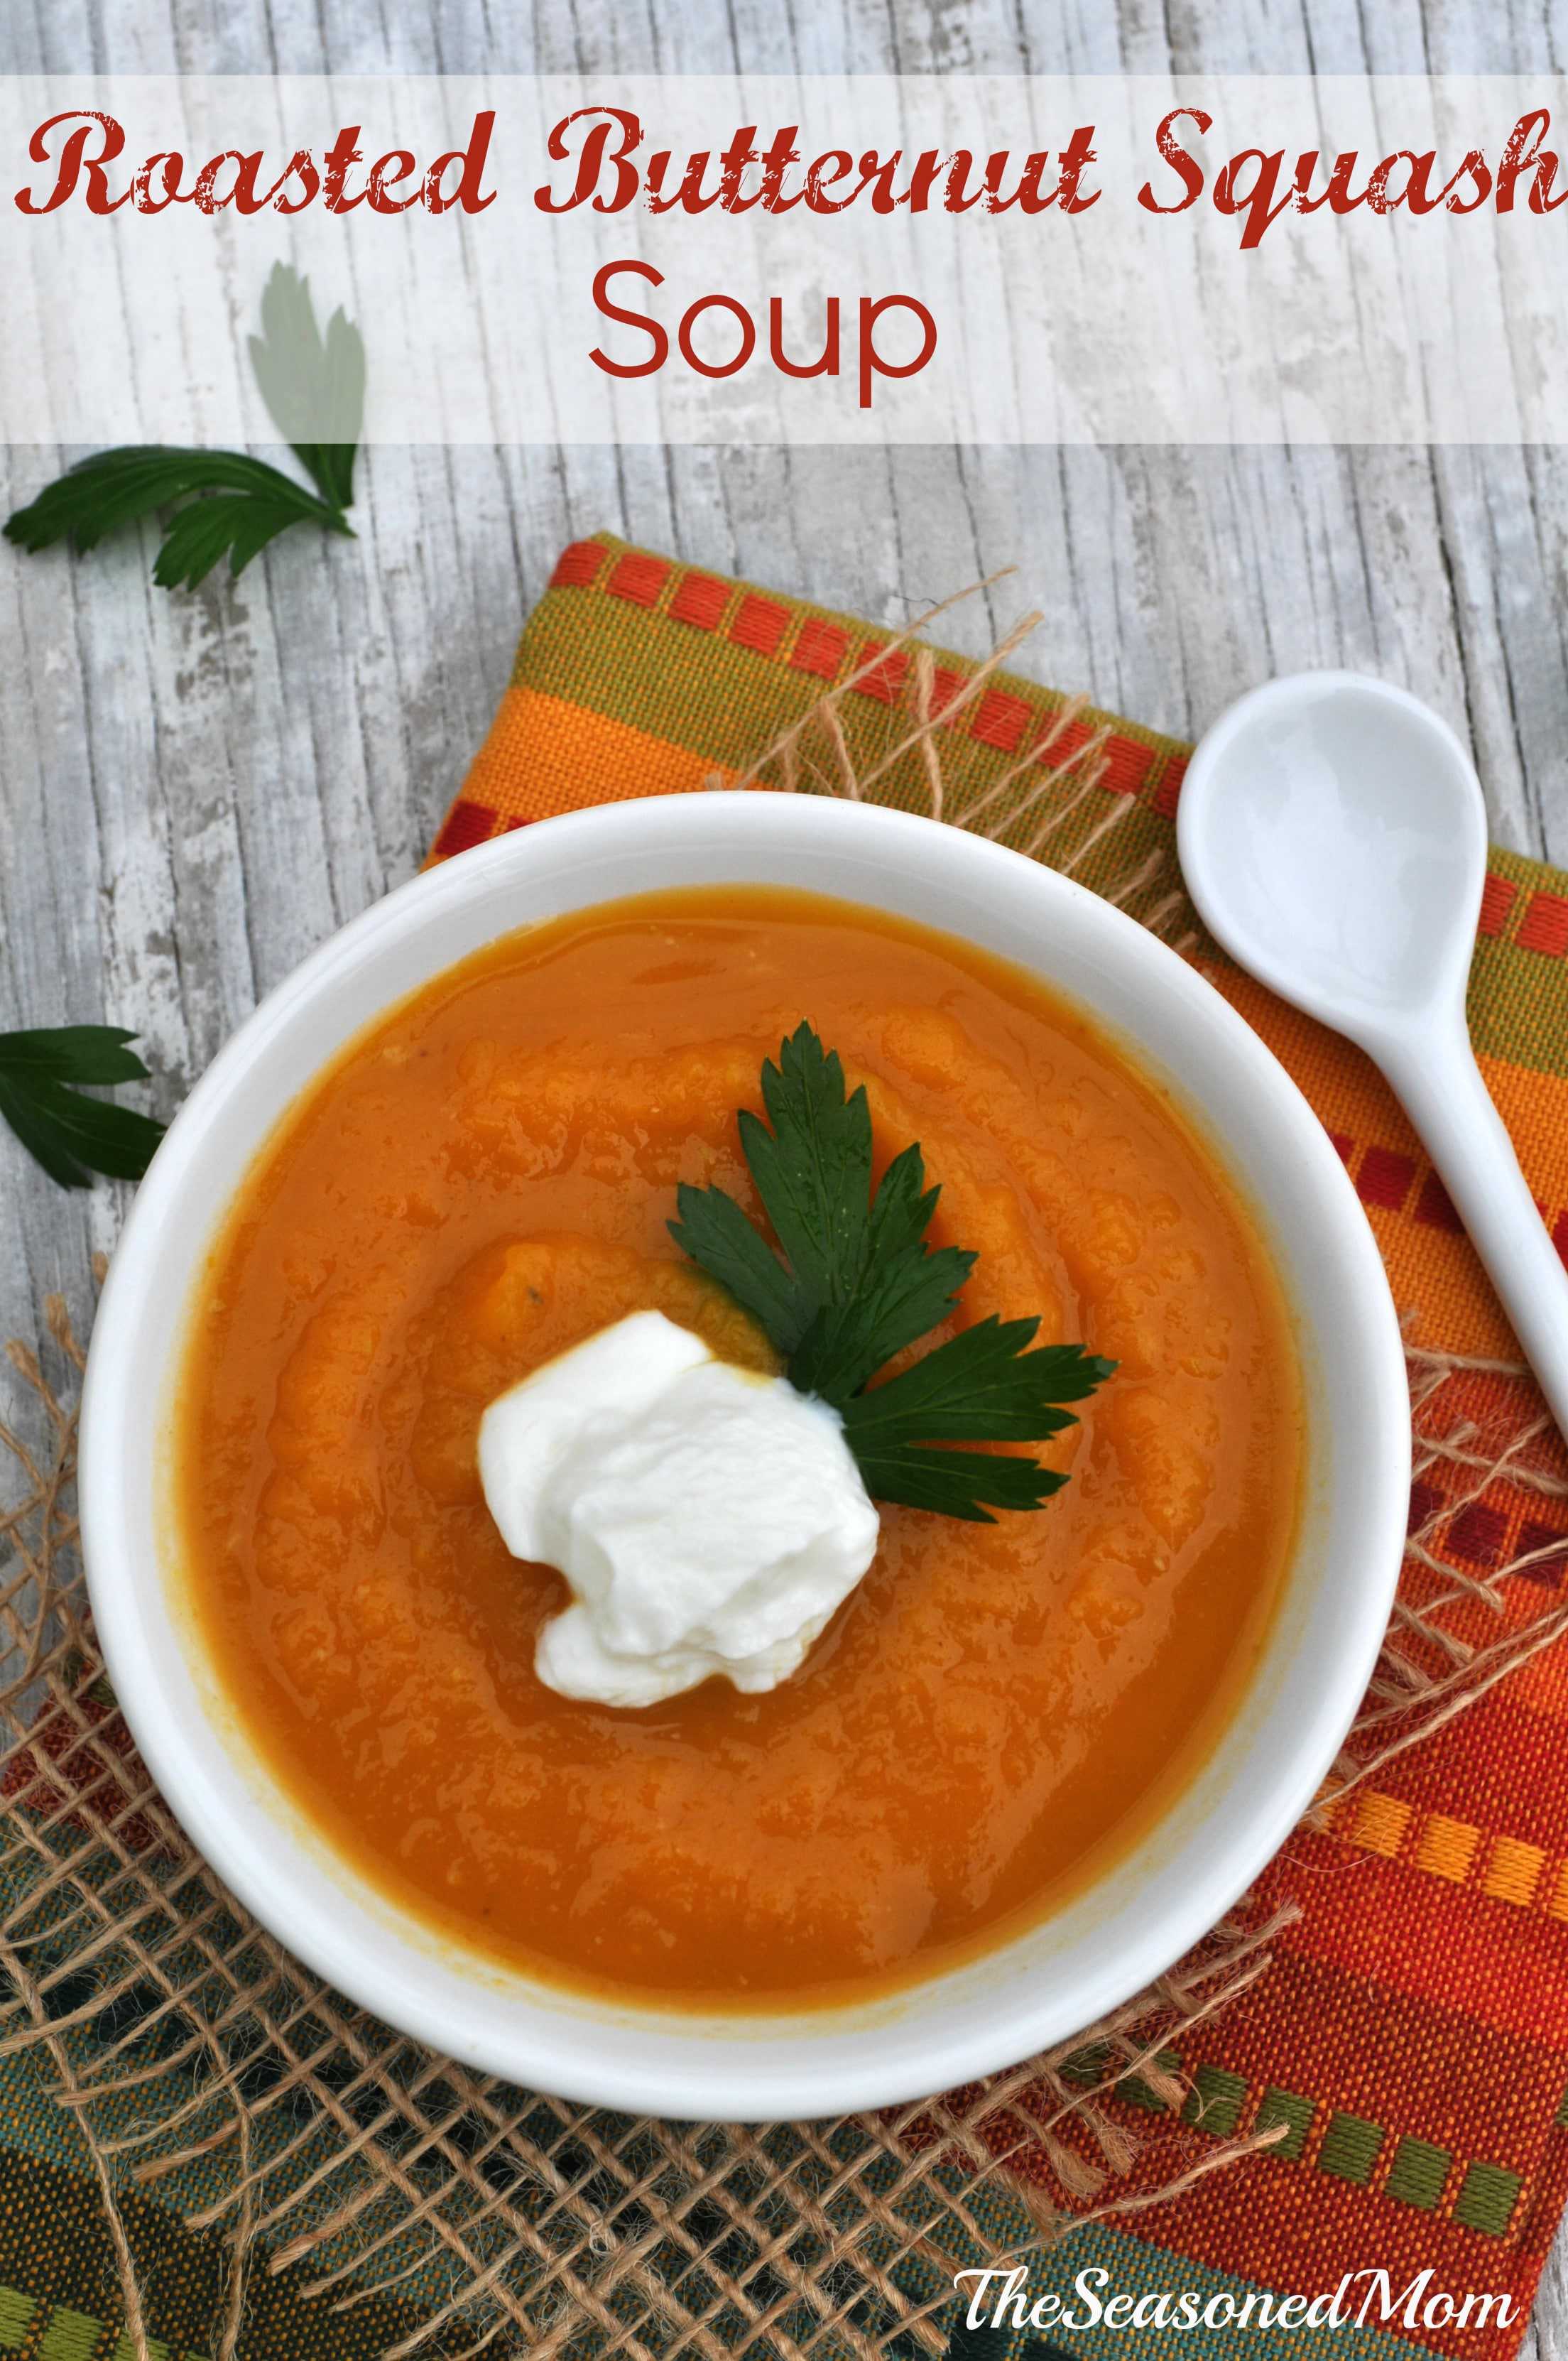 The Best Roasted Butternut Squash Soup - The Seasoned Mom